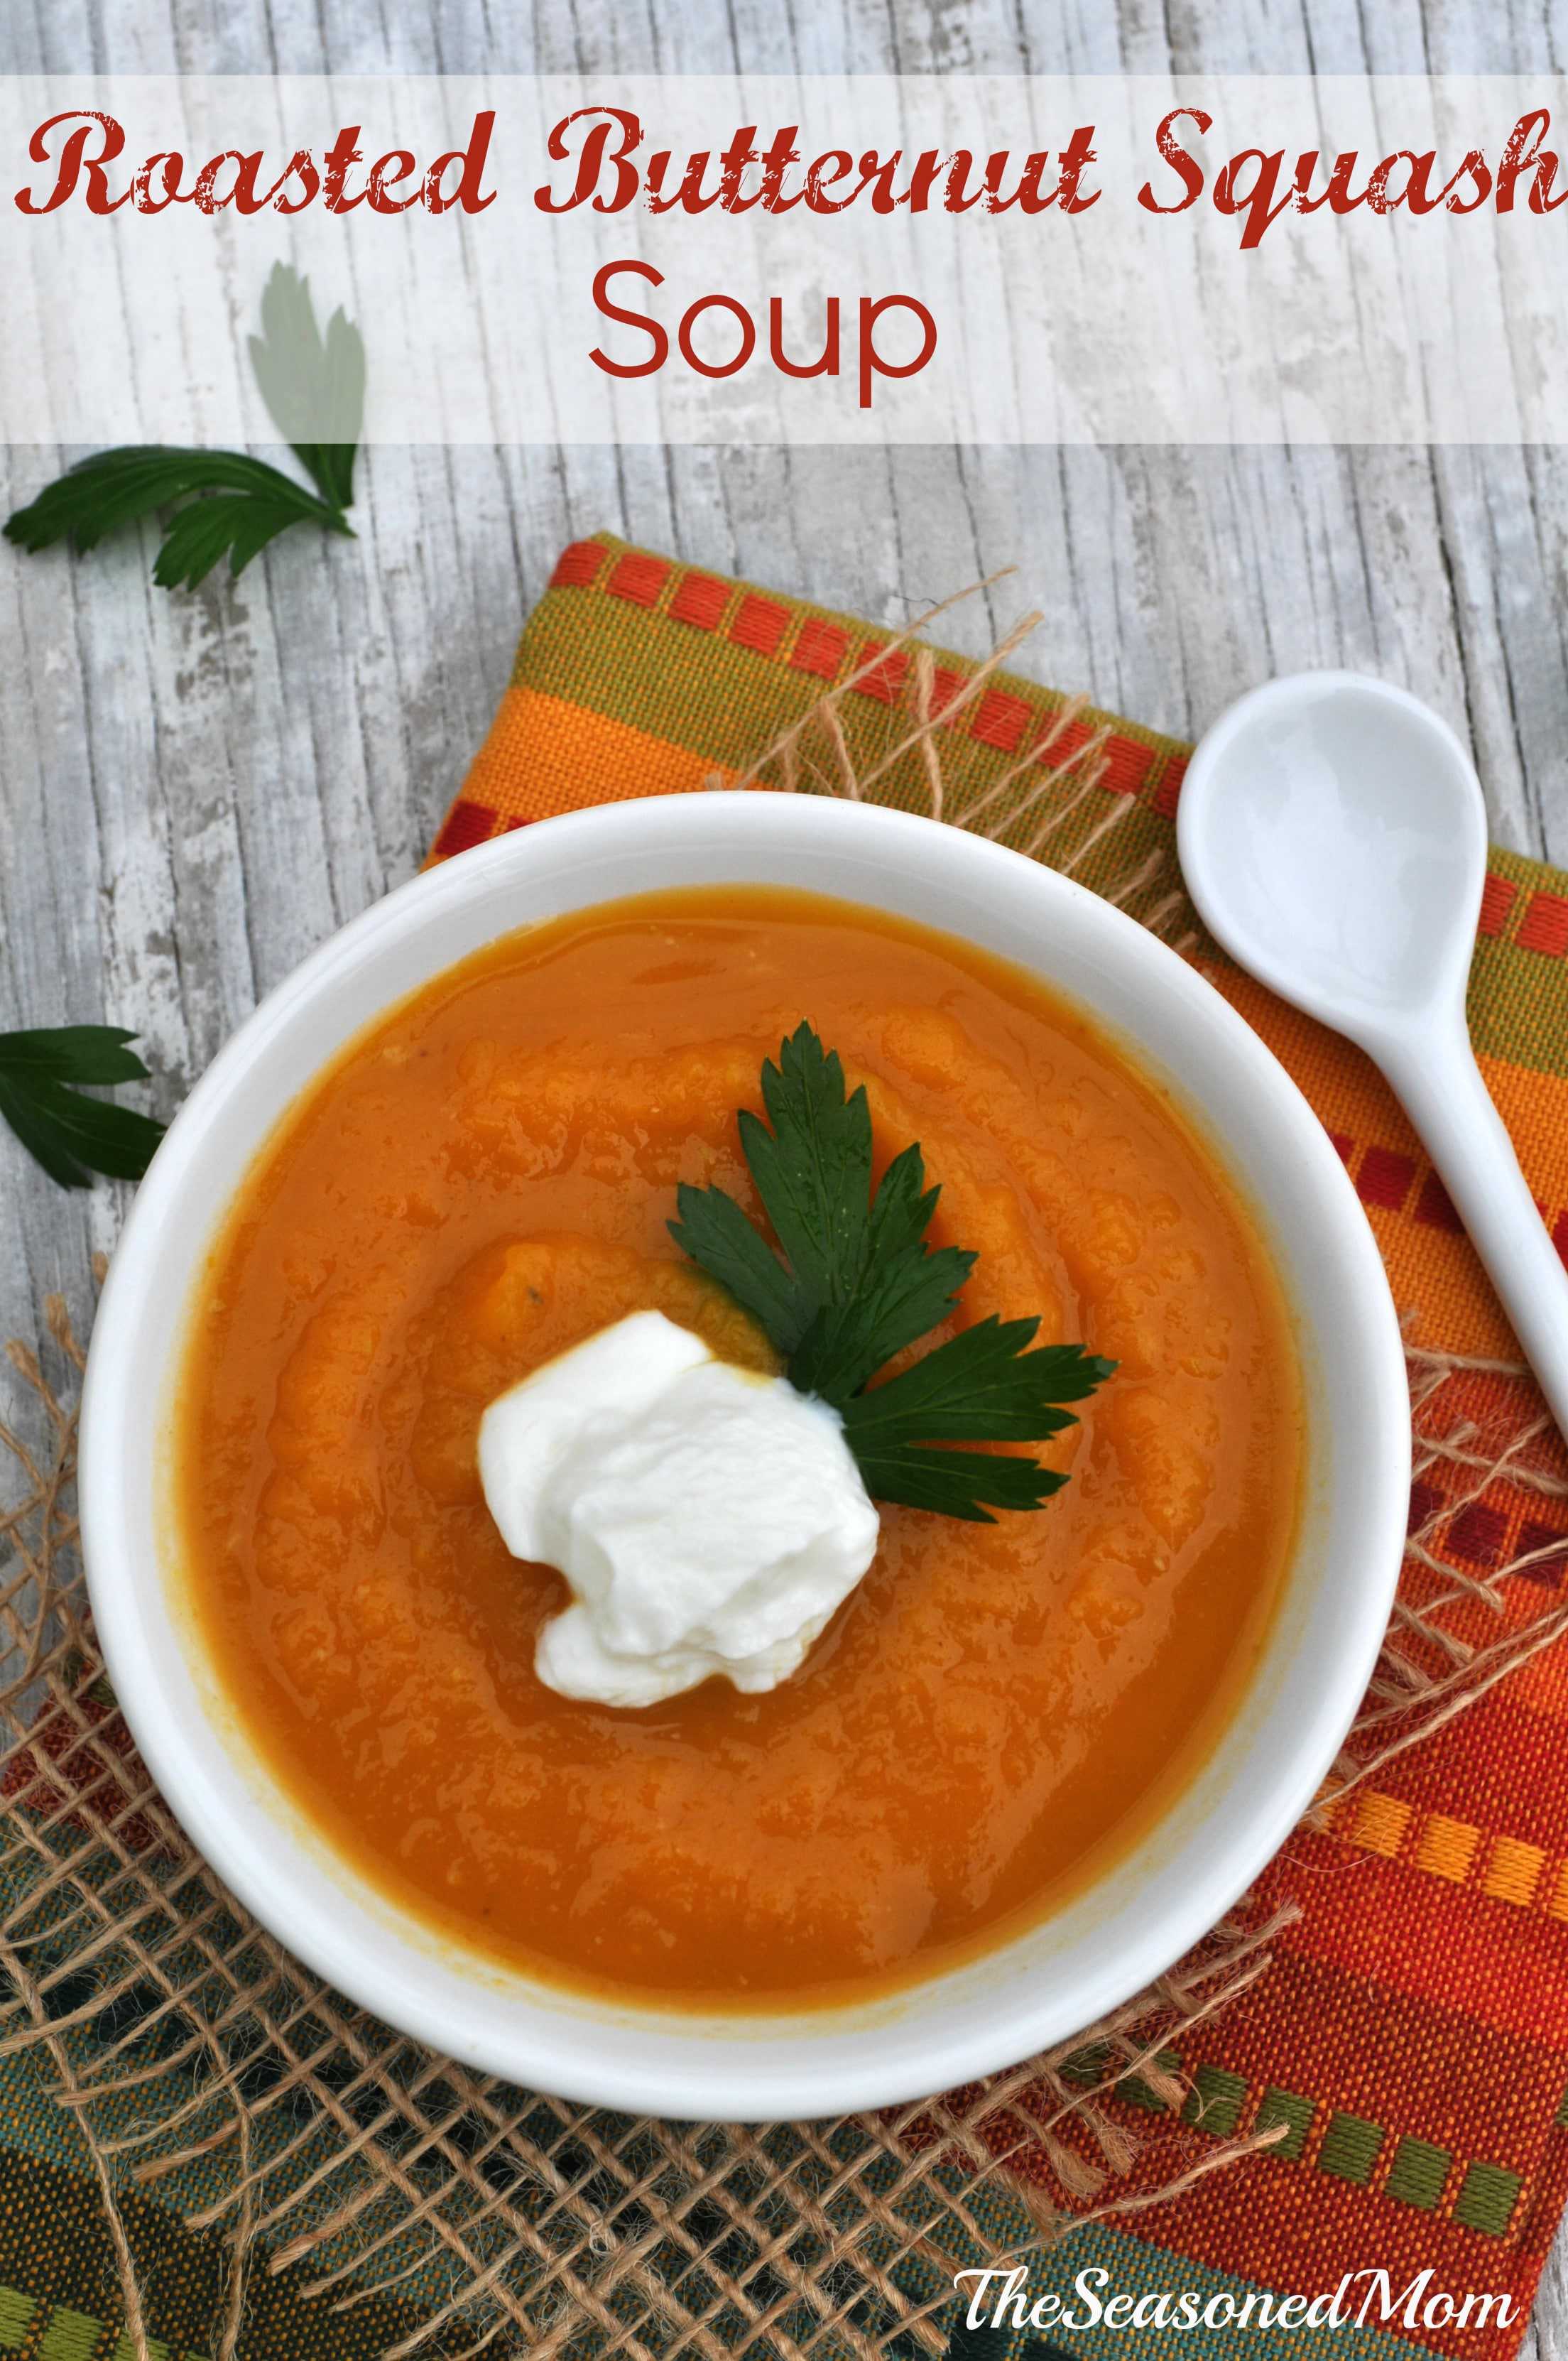 The Best Roasted Butternut Squash Soup - The Seasoned Mom